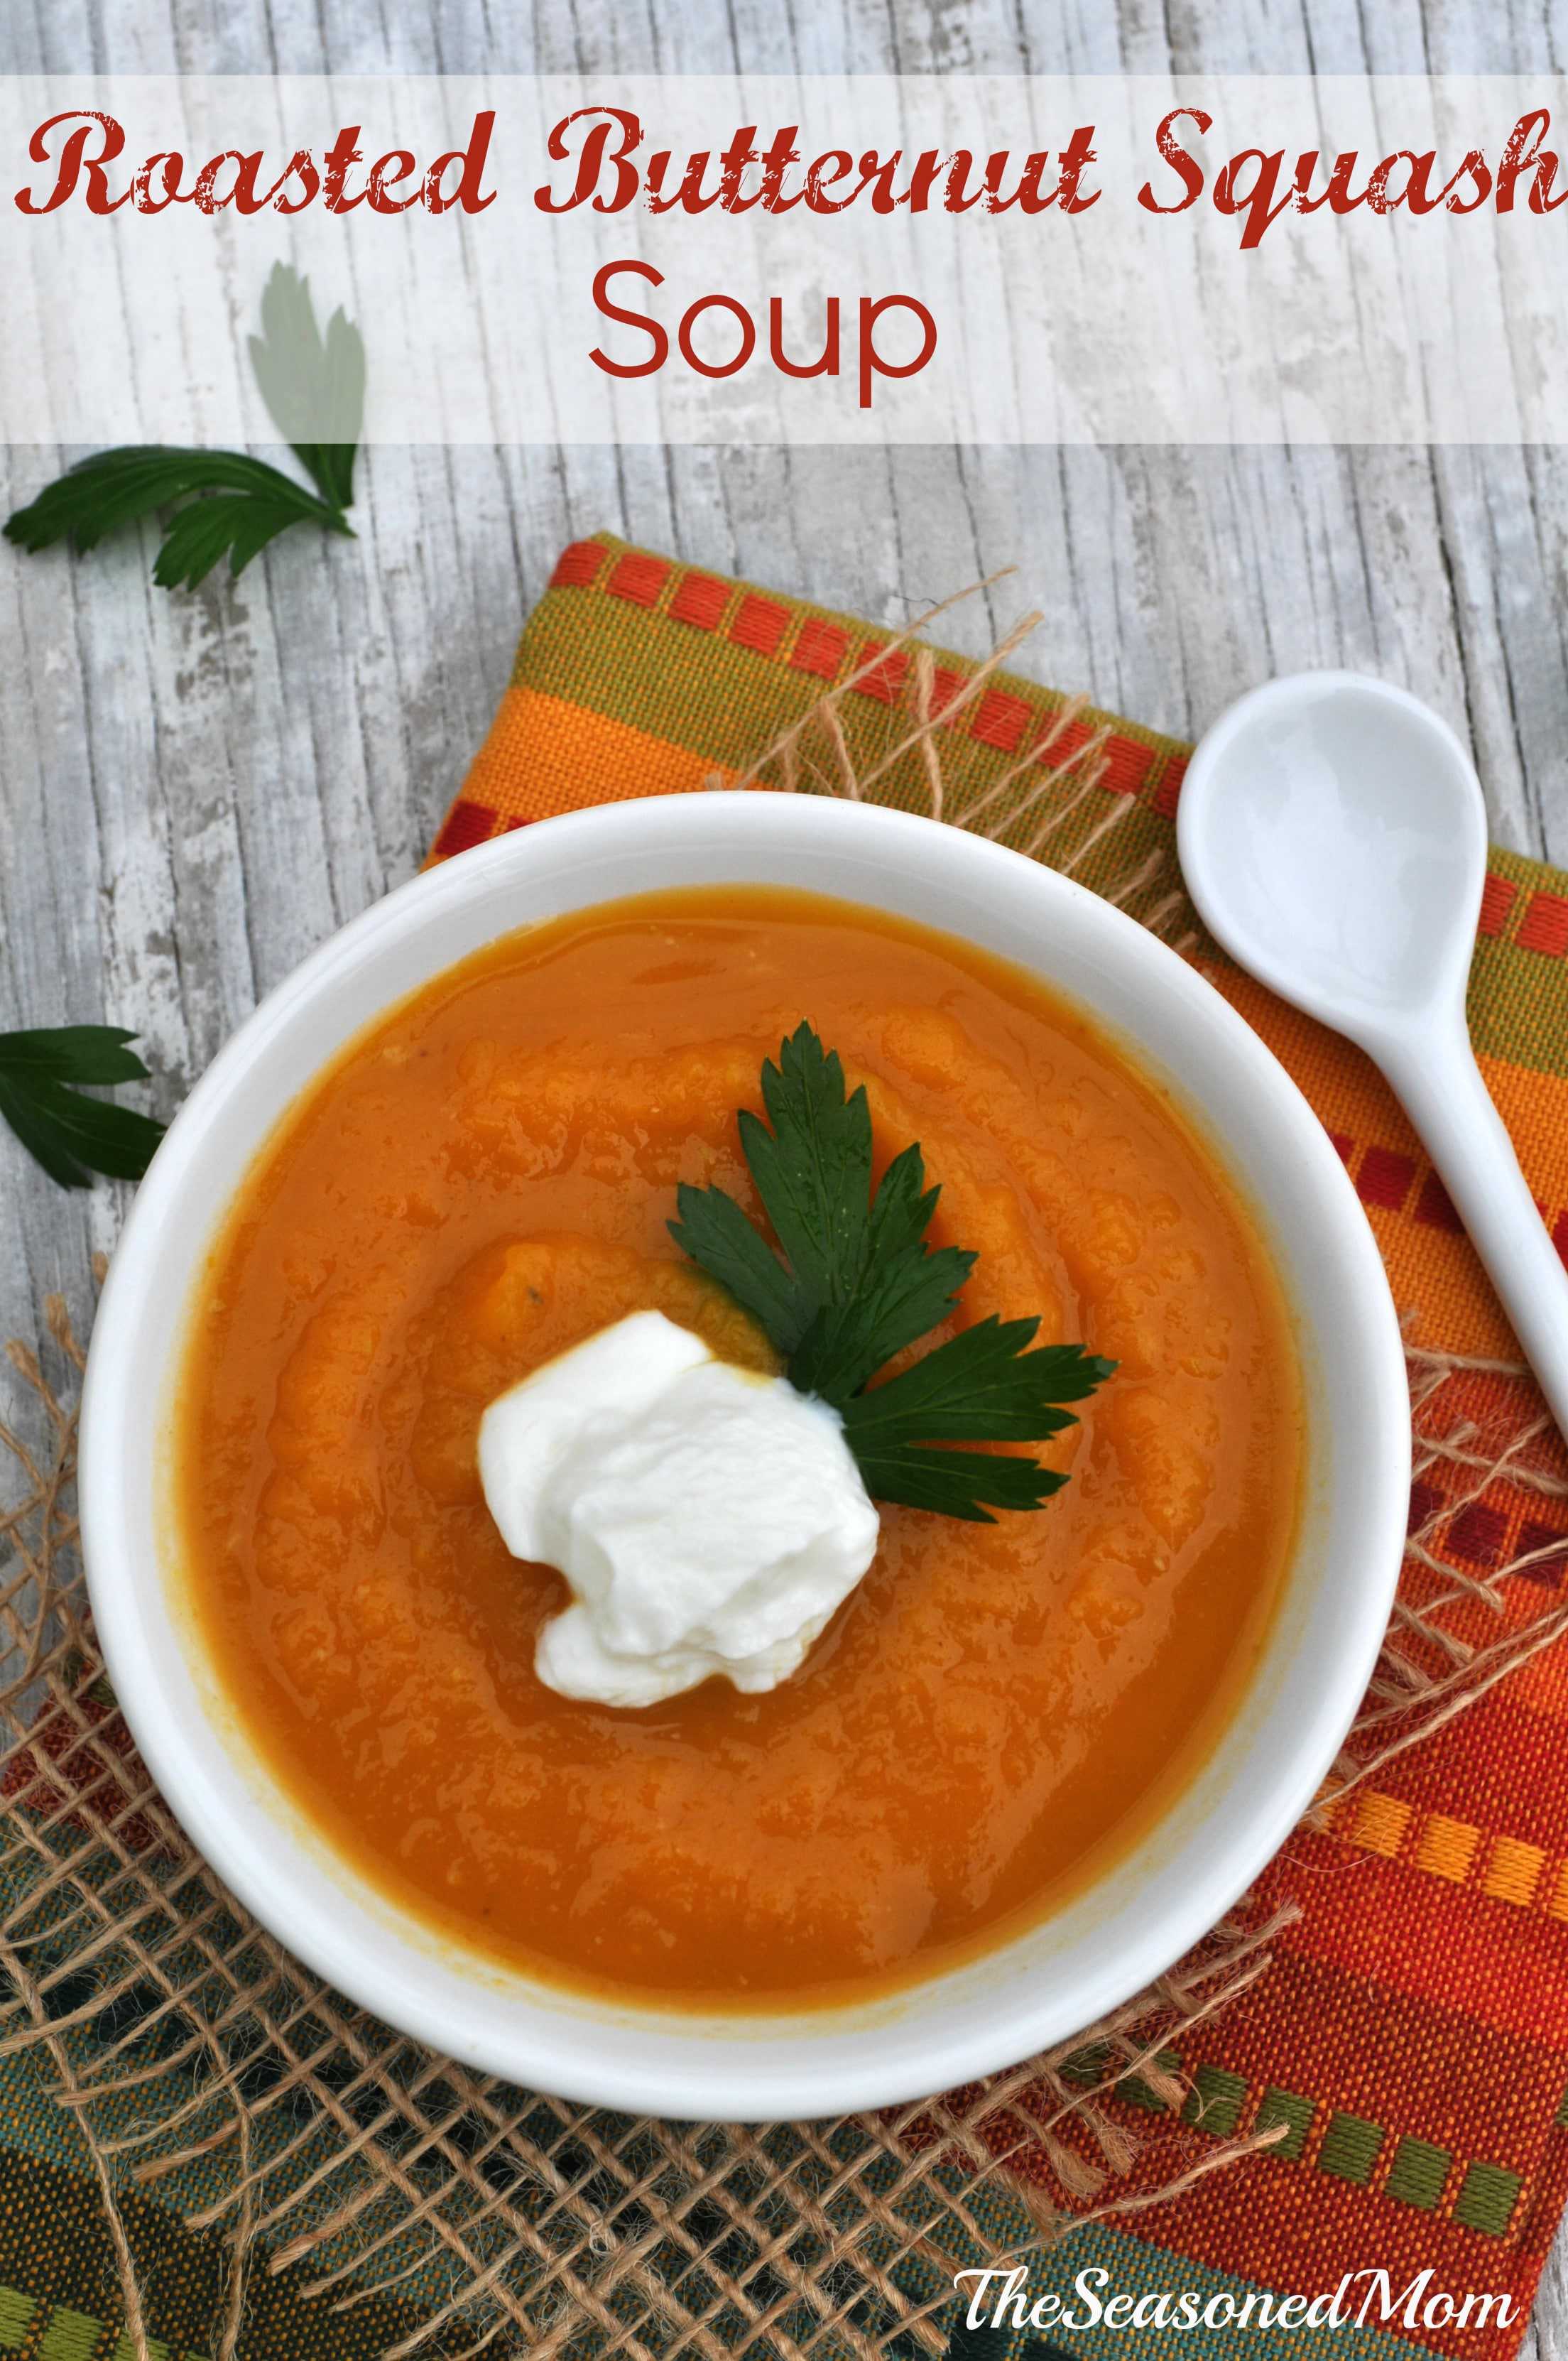 The Best Roasted Butternut Squash Soup - The Seasoned Mom